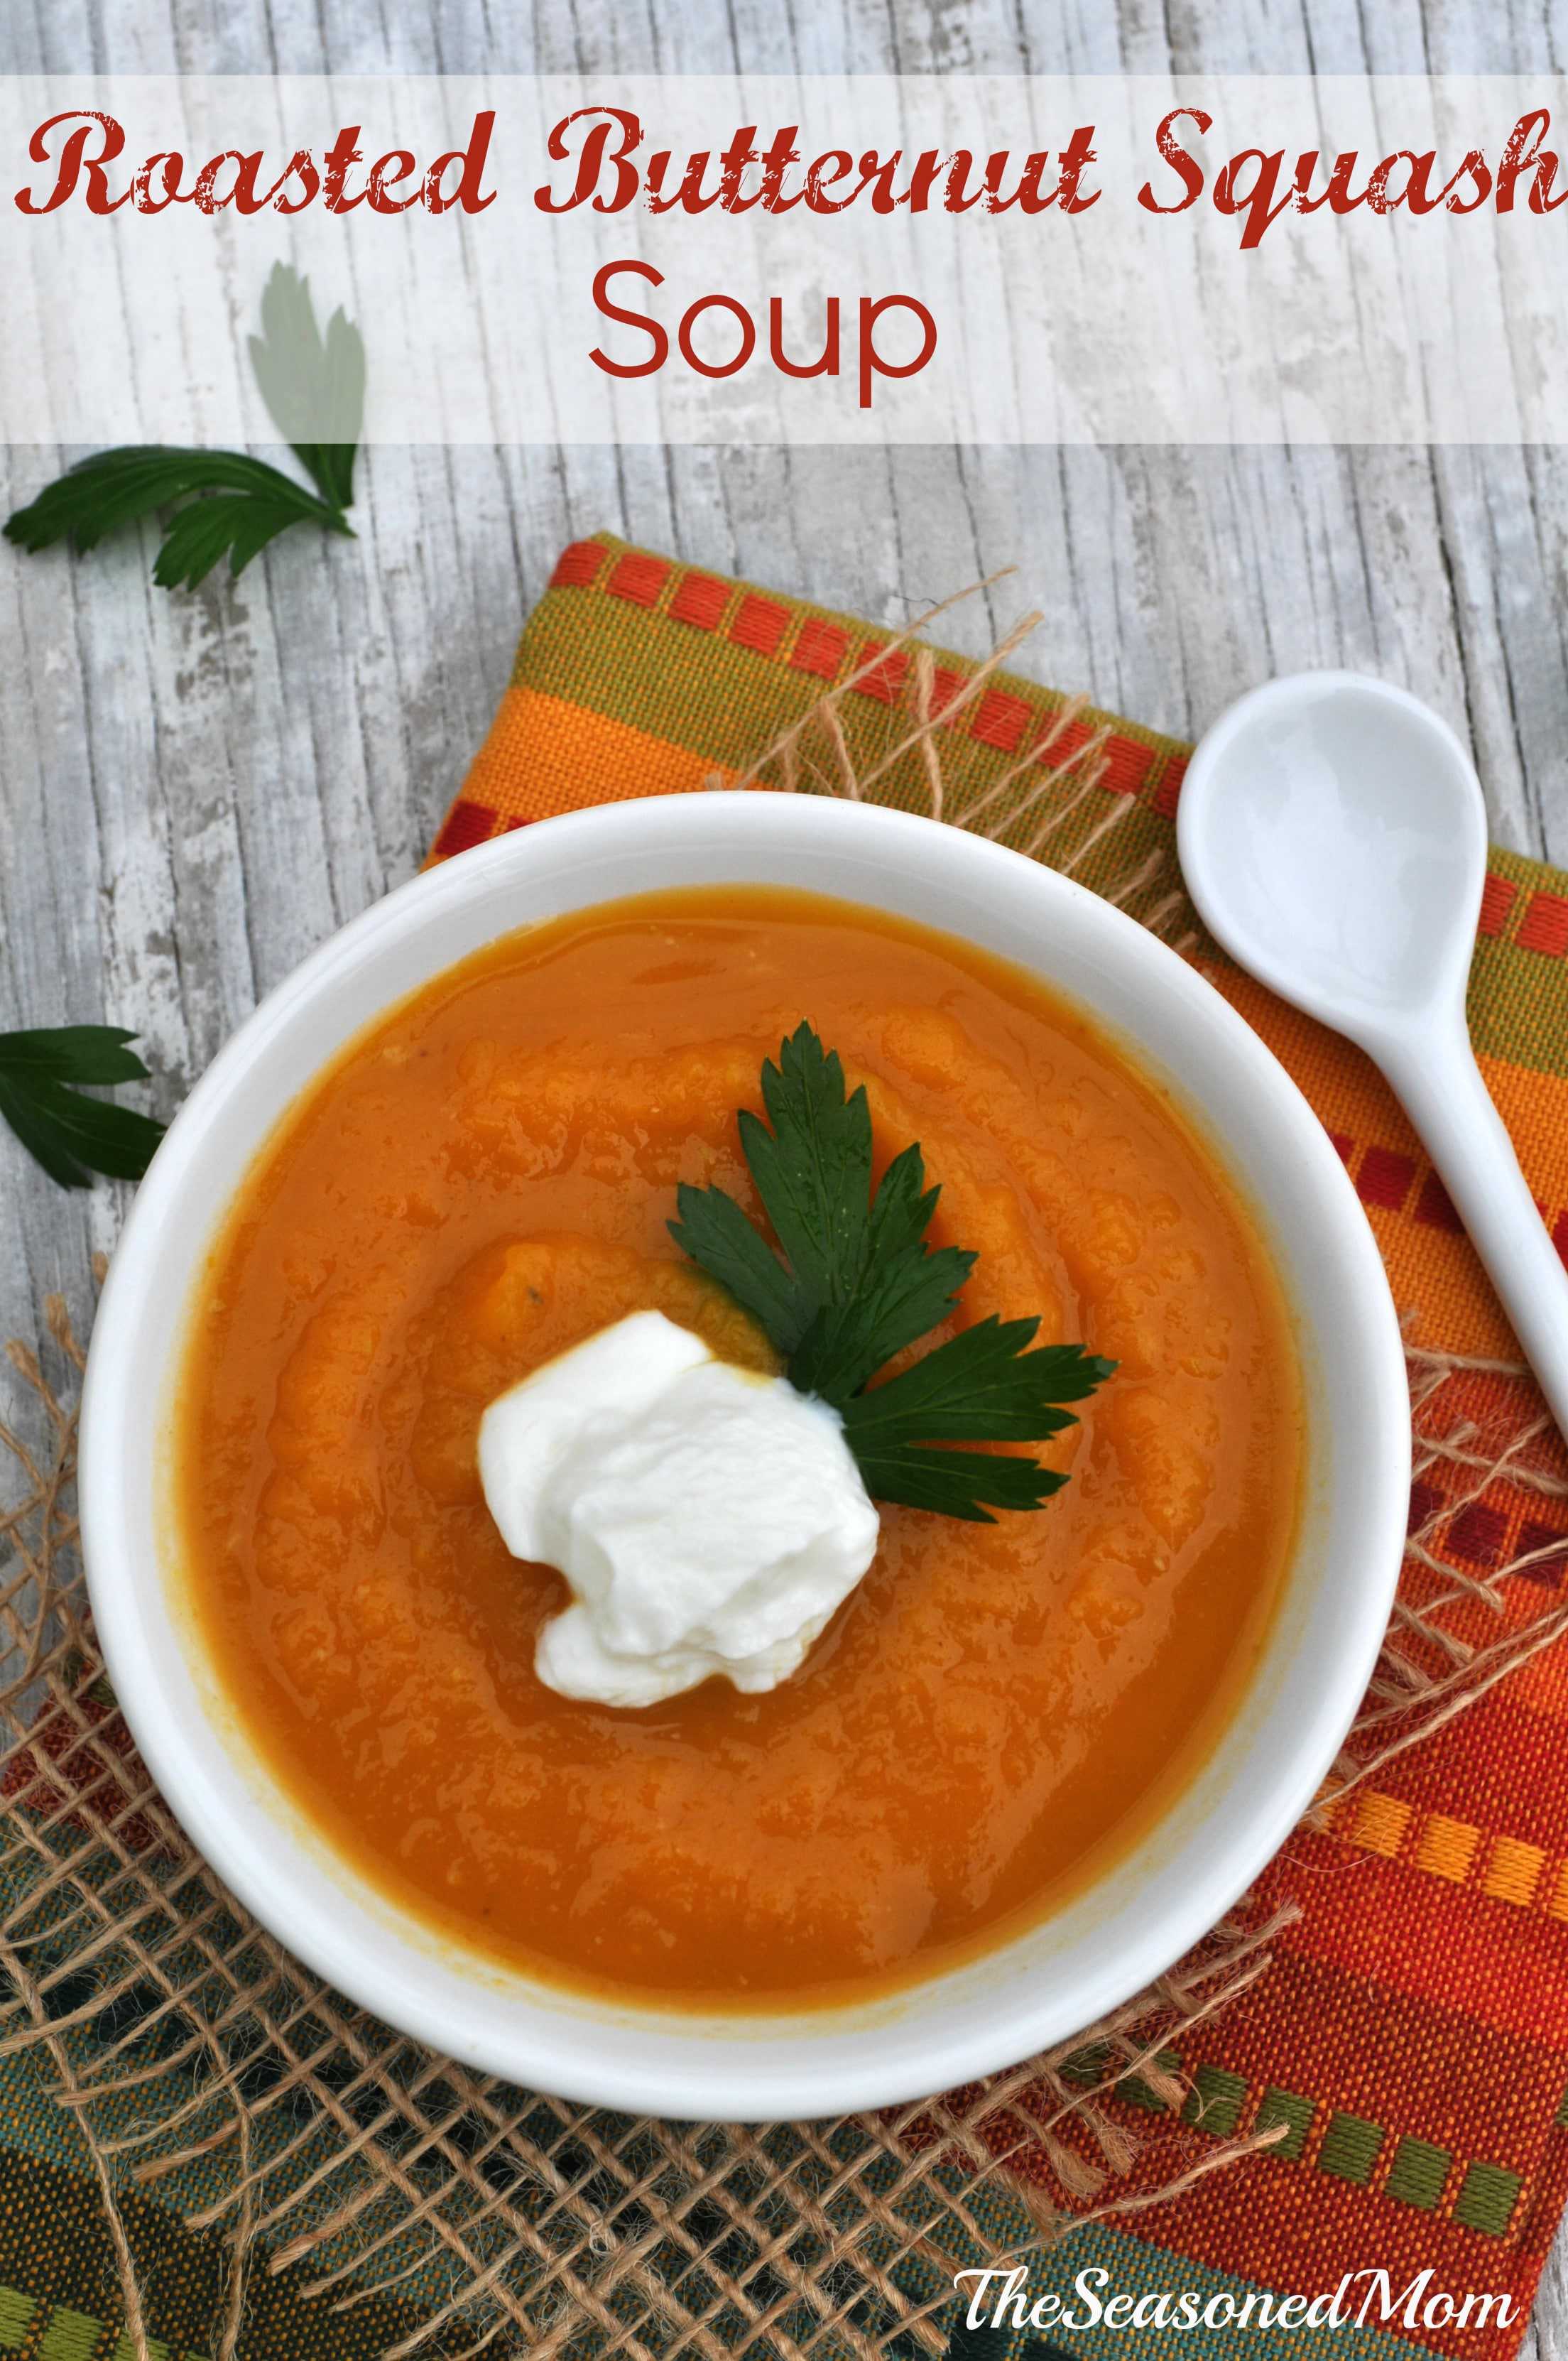 The Best Roasted Butternut Squash Soup - The Seasoned Mom